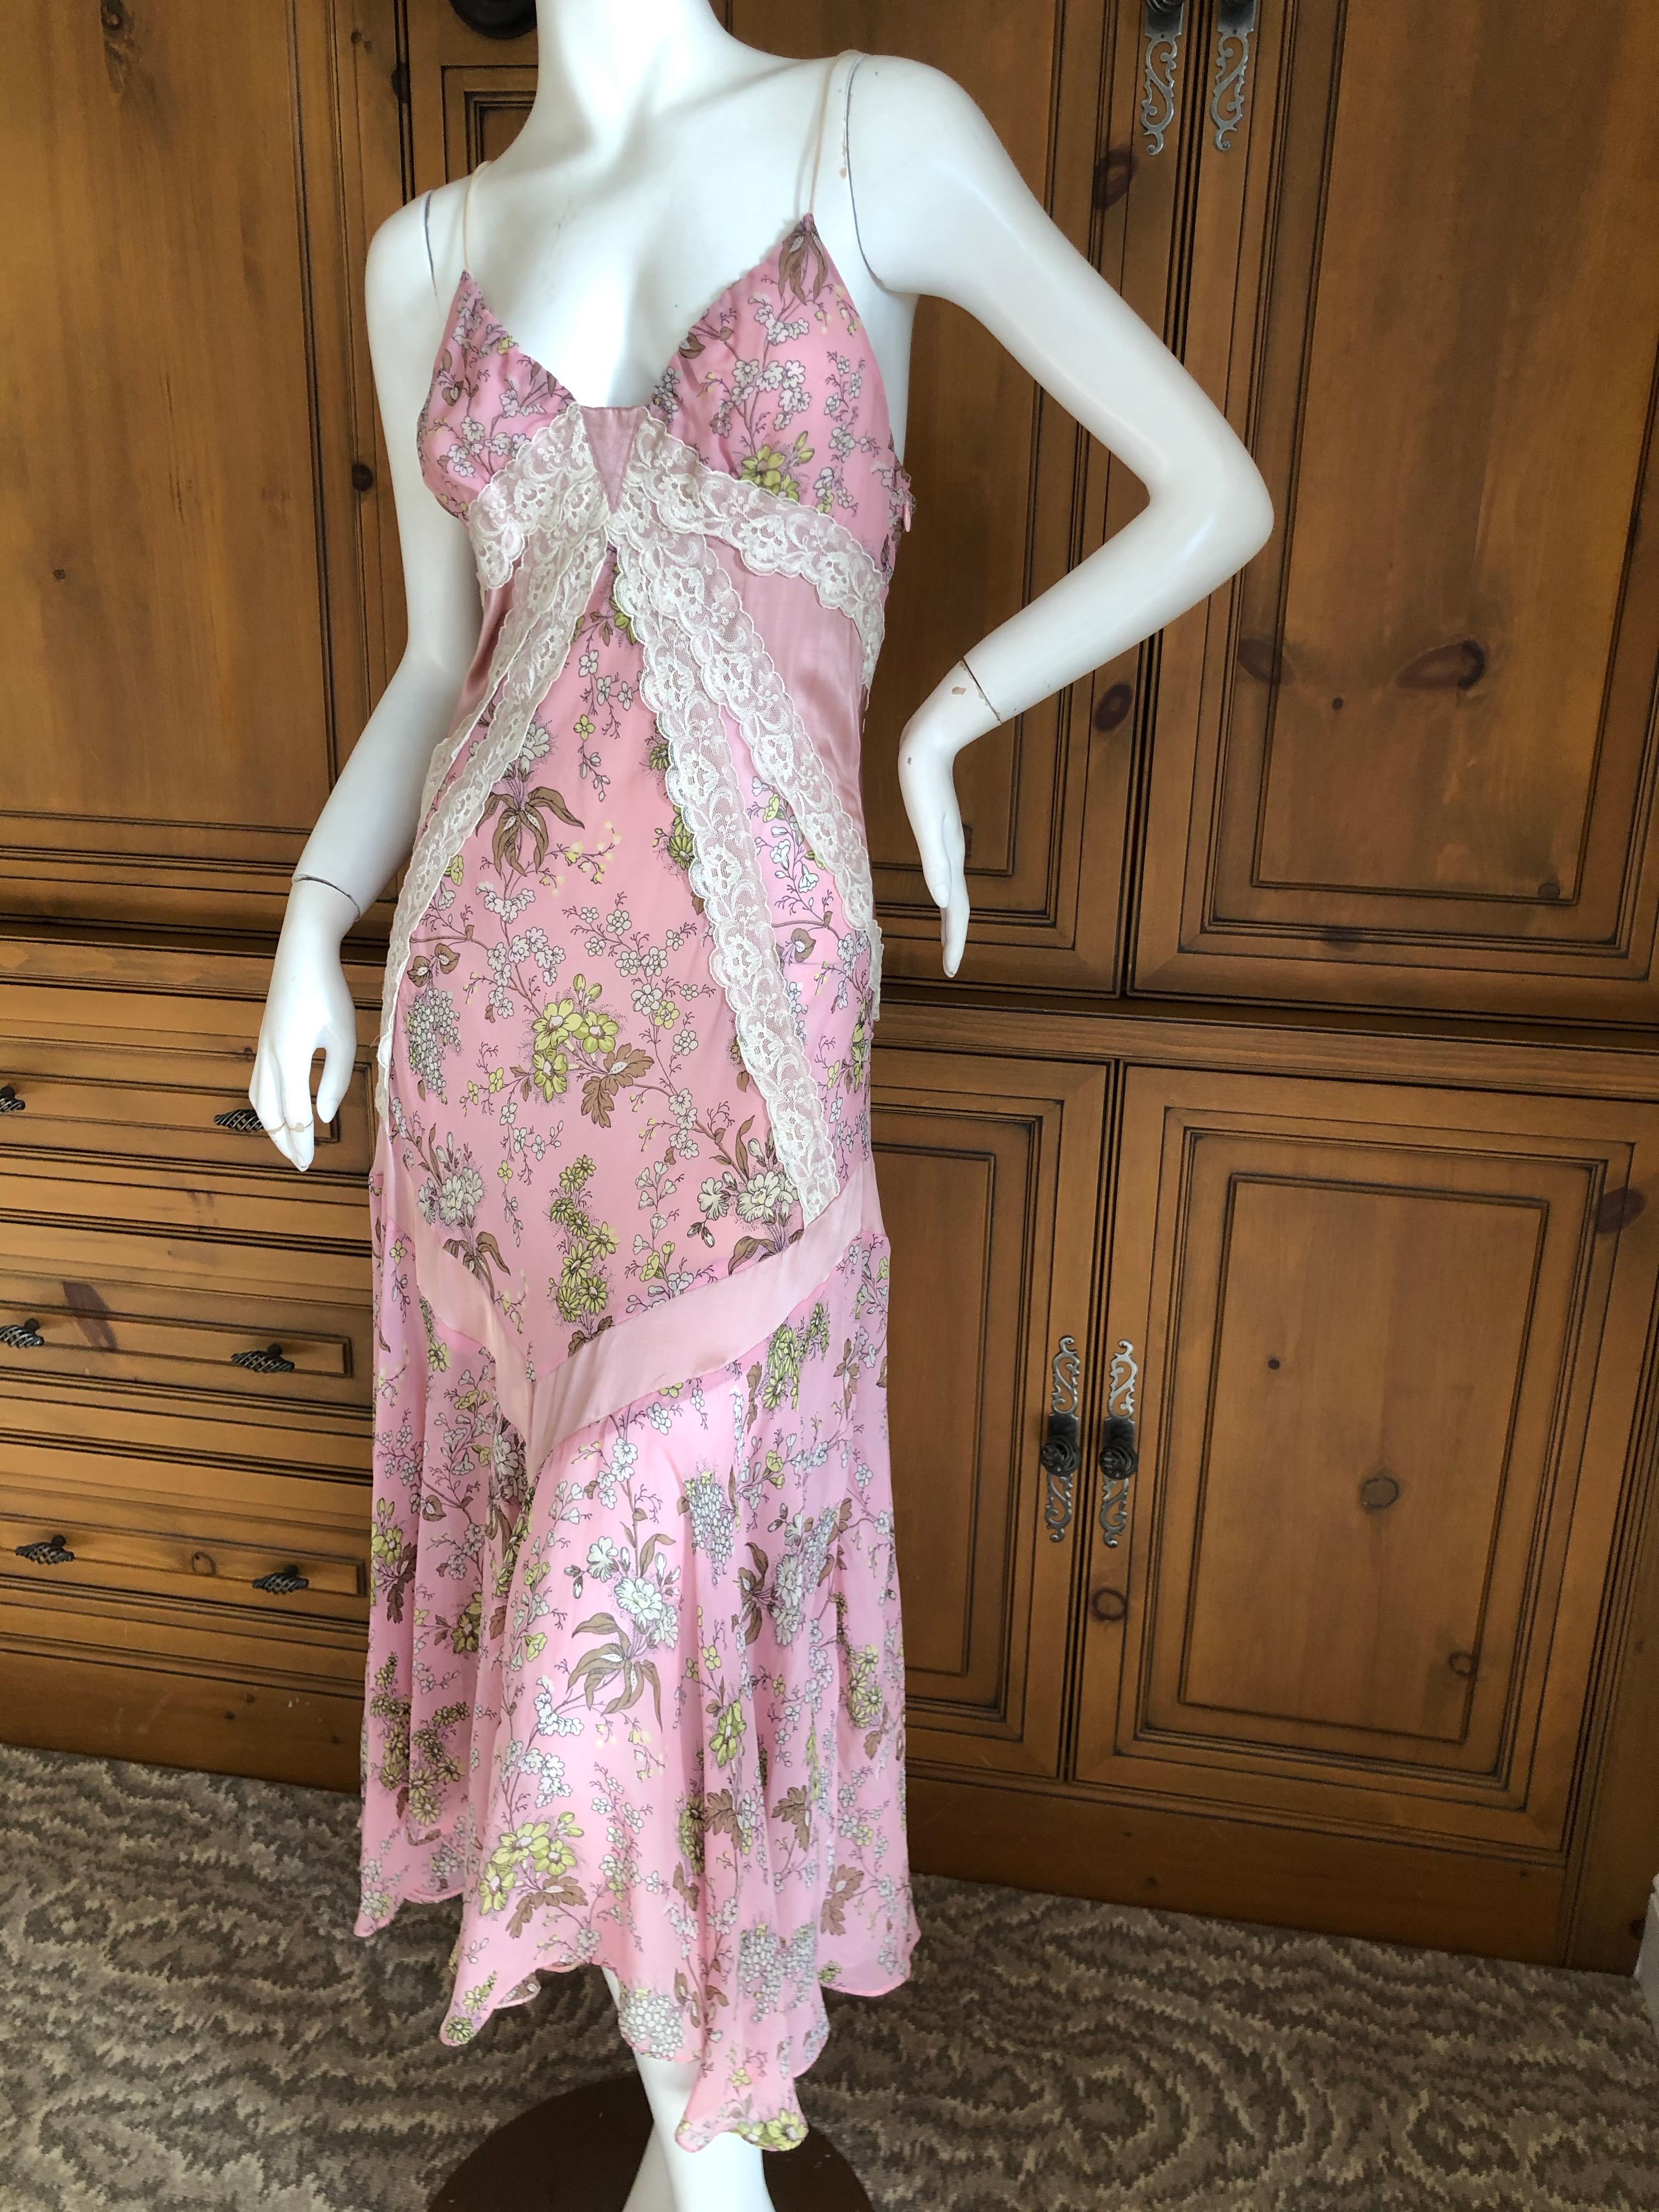 Dolce & Gabbana for D&G Vintage Silk Pink Lace Trim Dress.
This is so pretty, please use the zoom to see details.
  There is  a lot of stretch in the silk.
Size 44
Bust 36